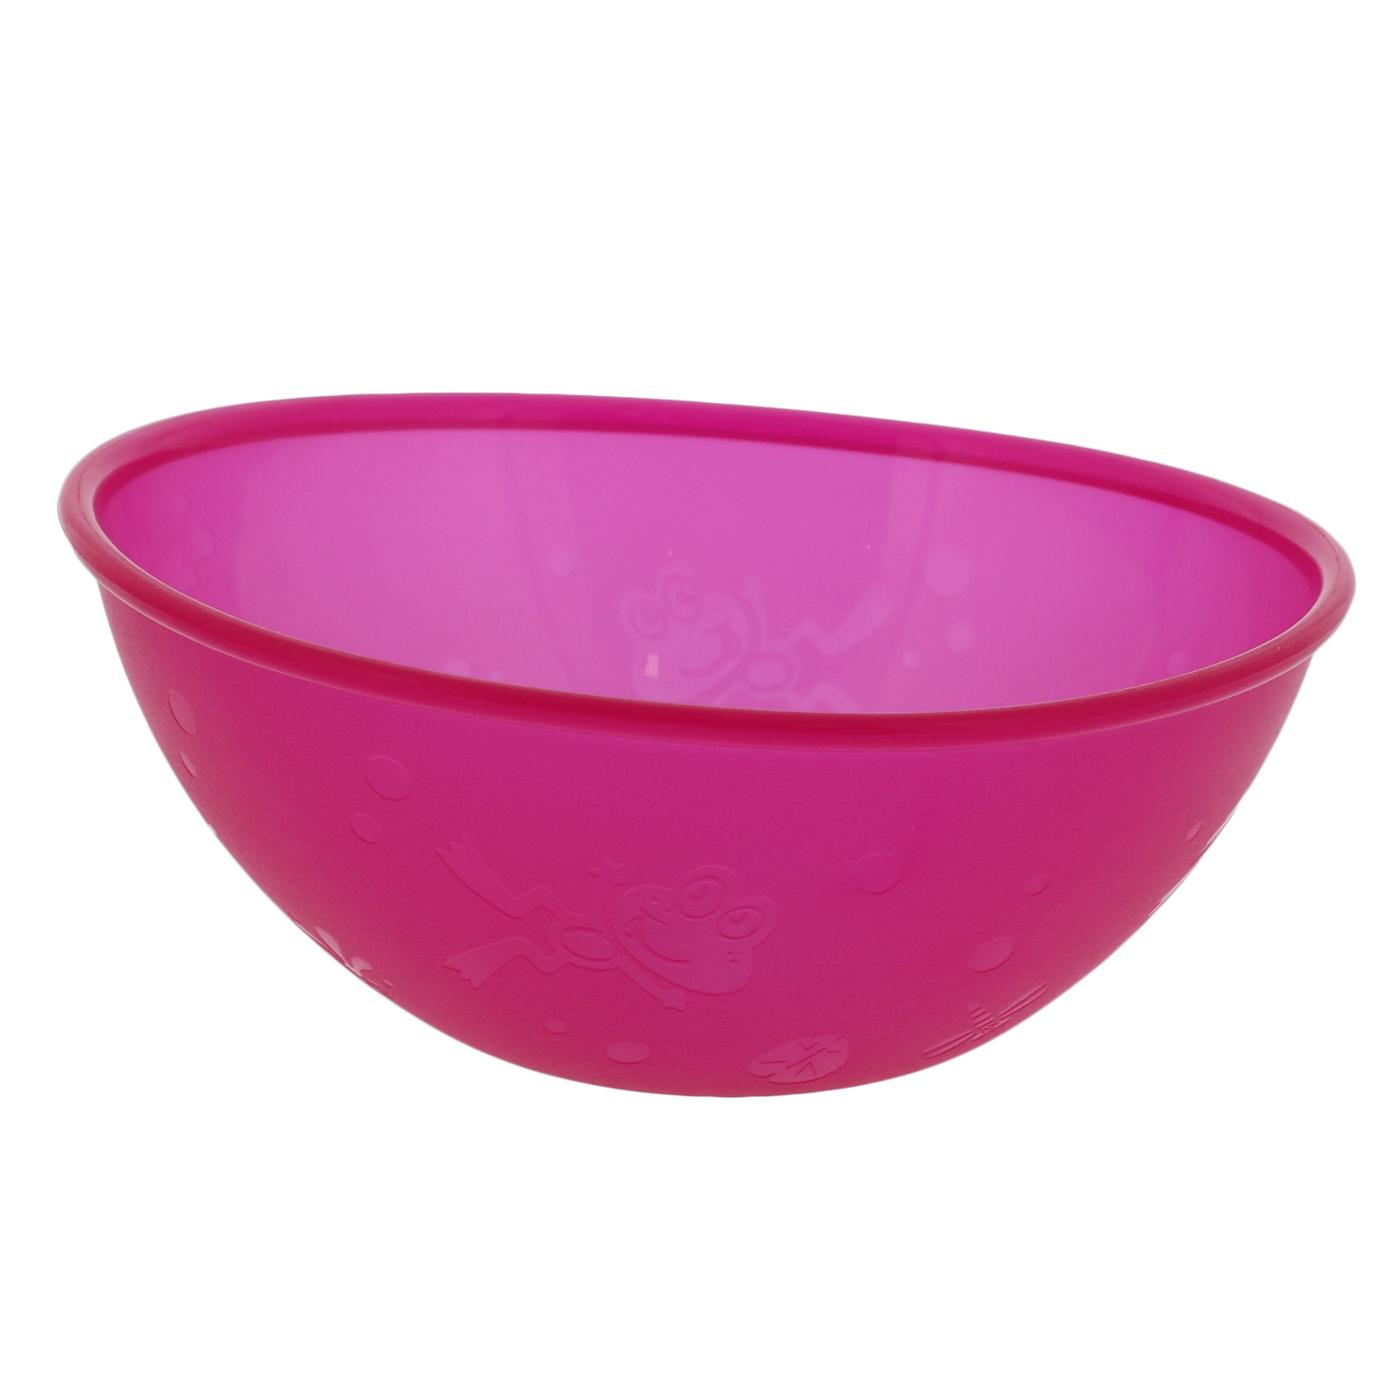 Nuby Embossed Value Feeding Bowl, Assorted Colors; image 6 of 6